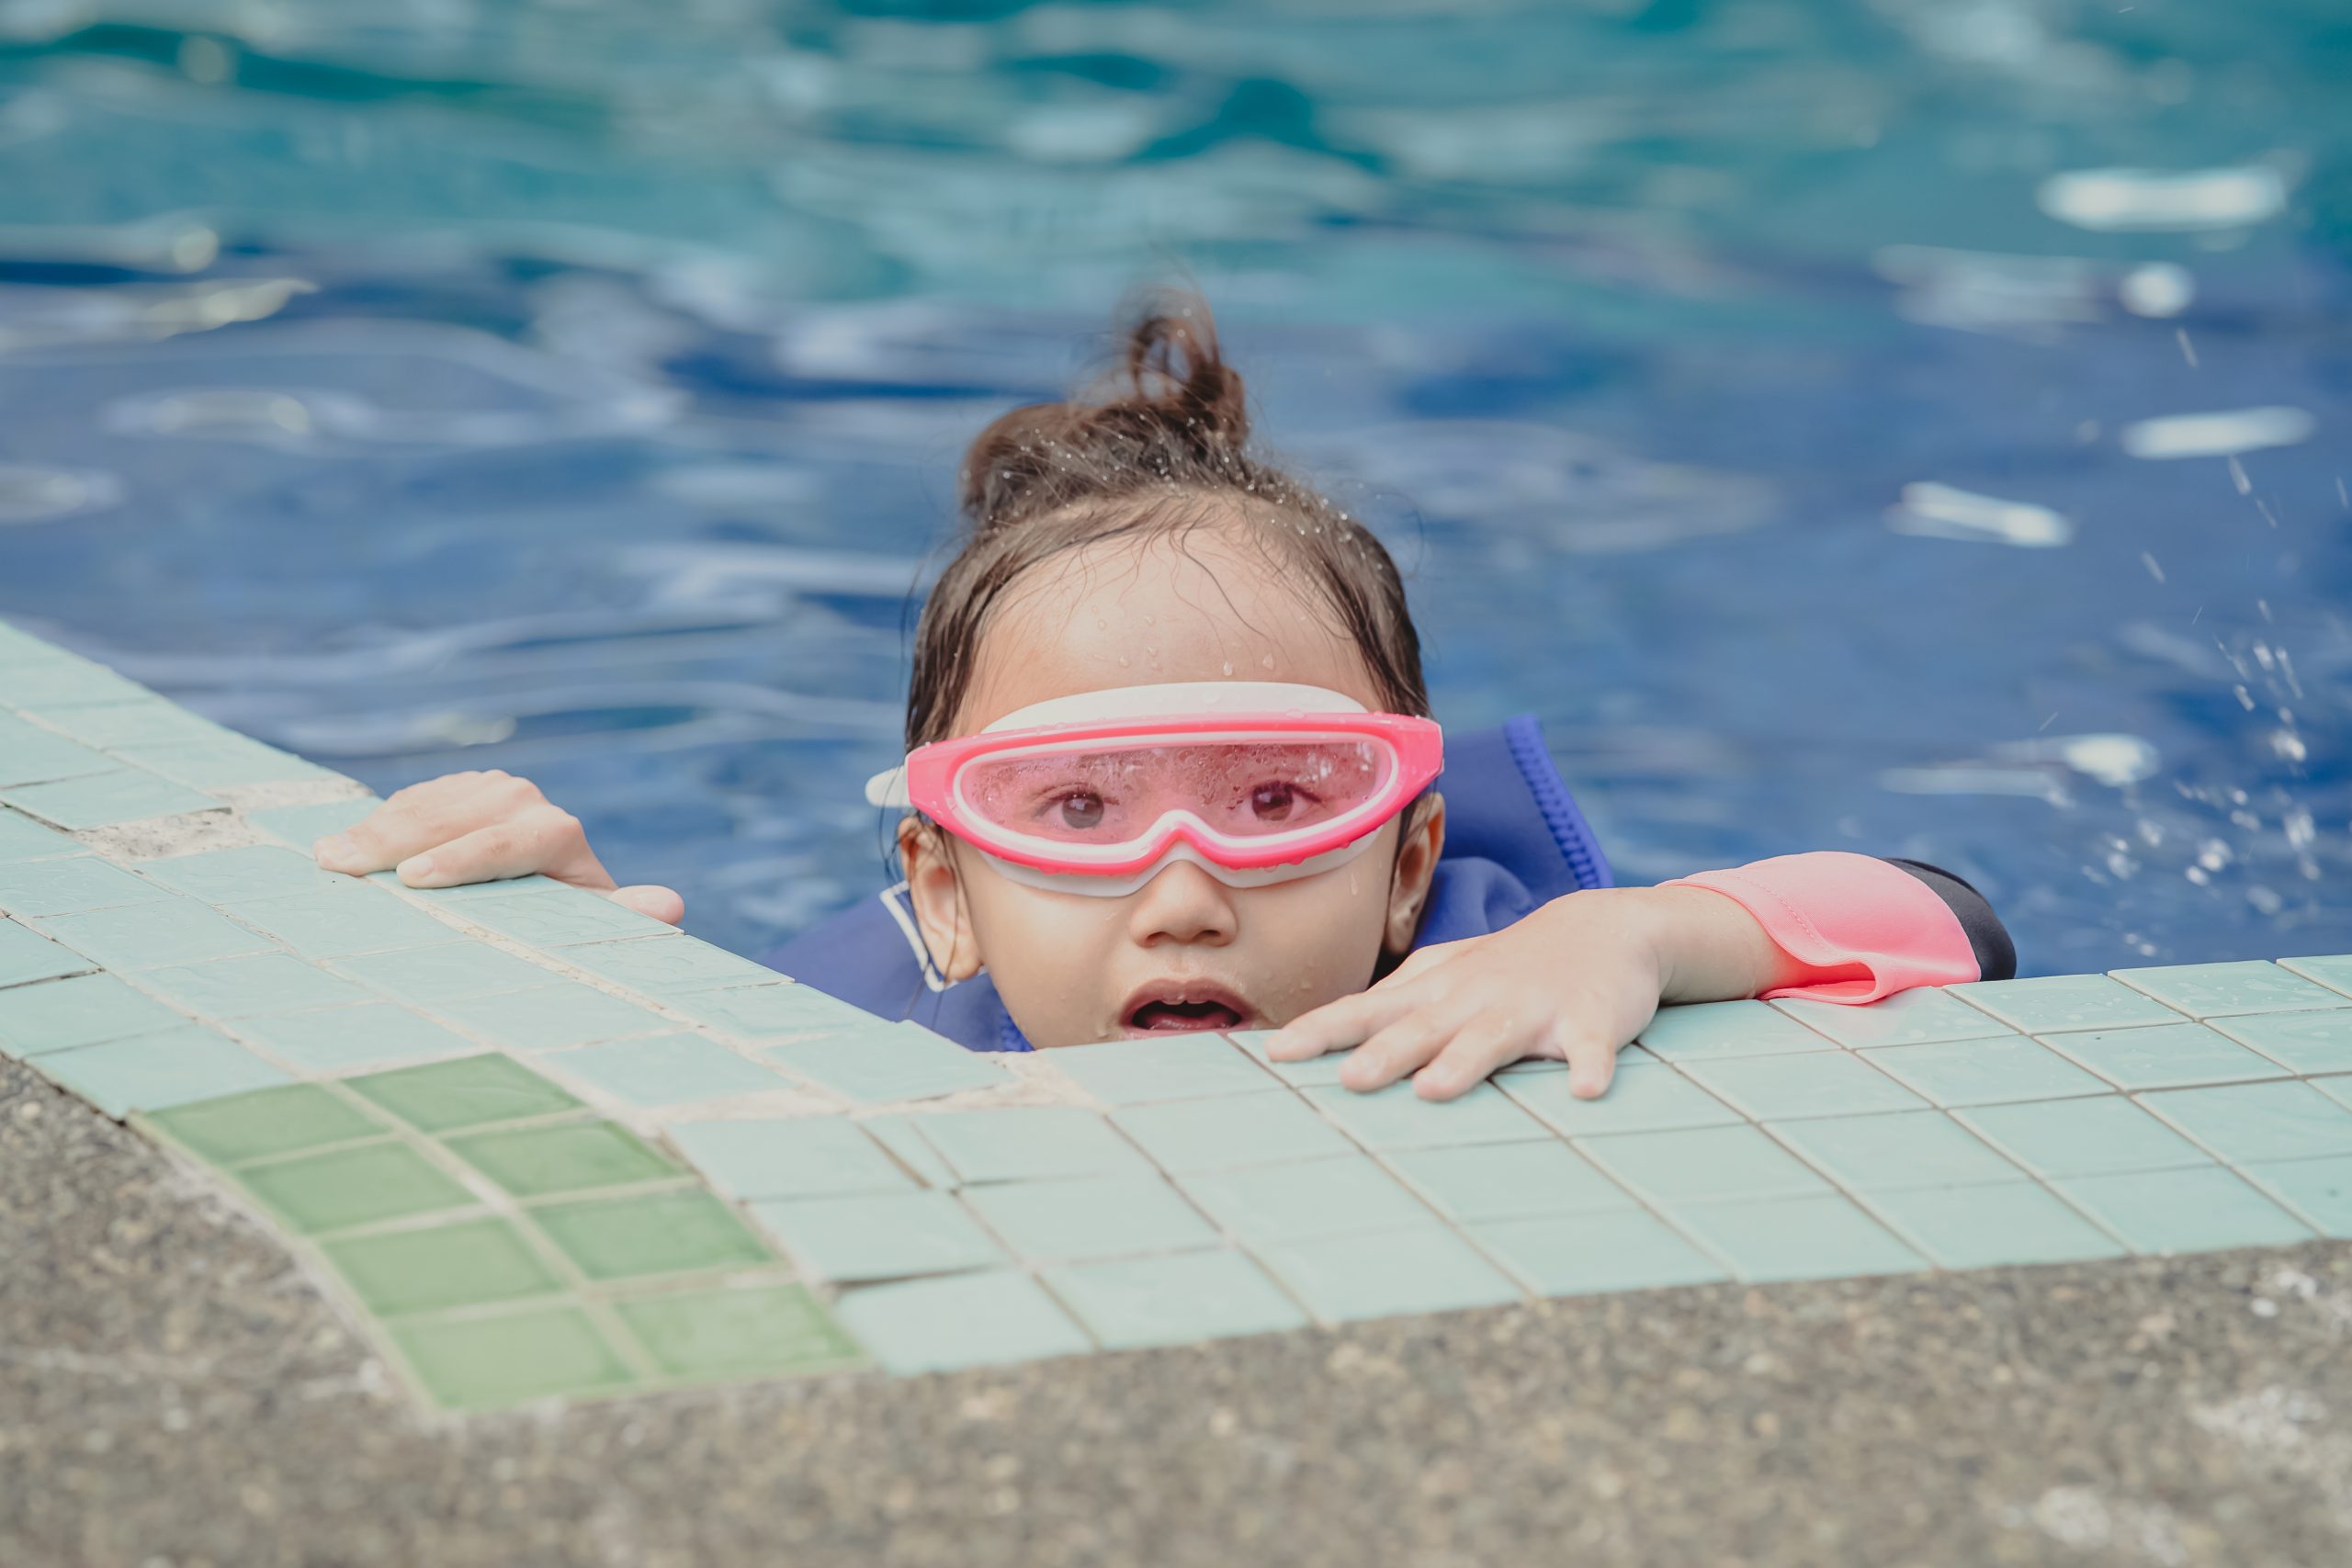 little-girl-wearing-life-goggles-in-the-swimming-2022-11-14-12-33-08-utc-scaled